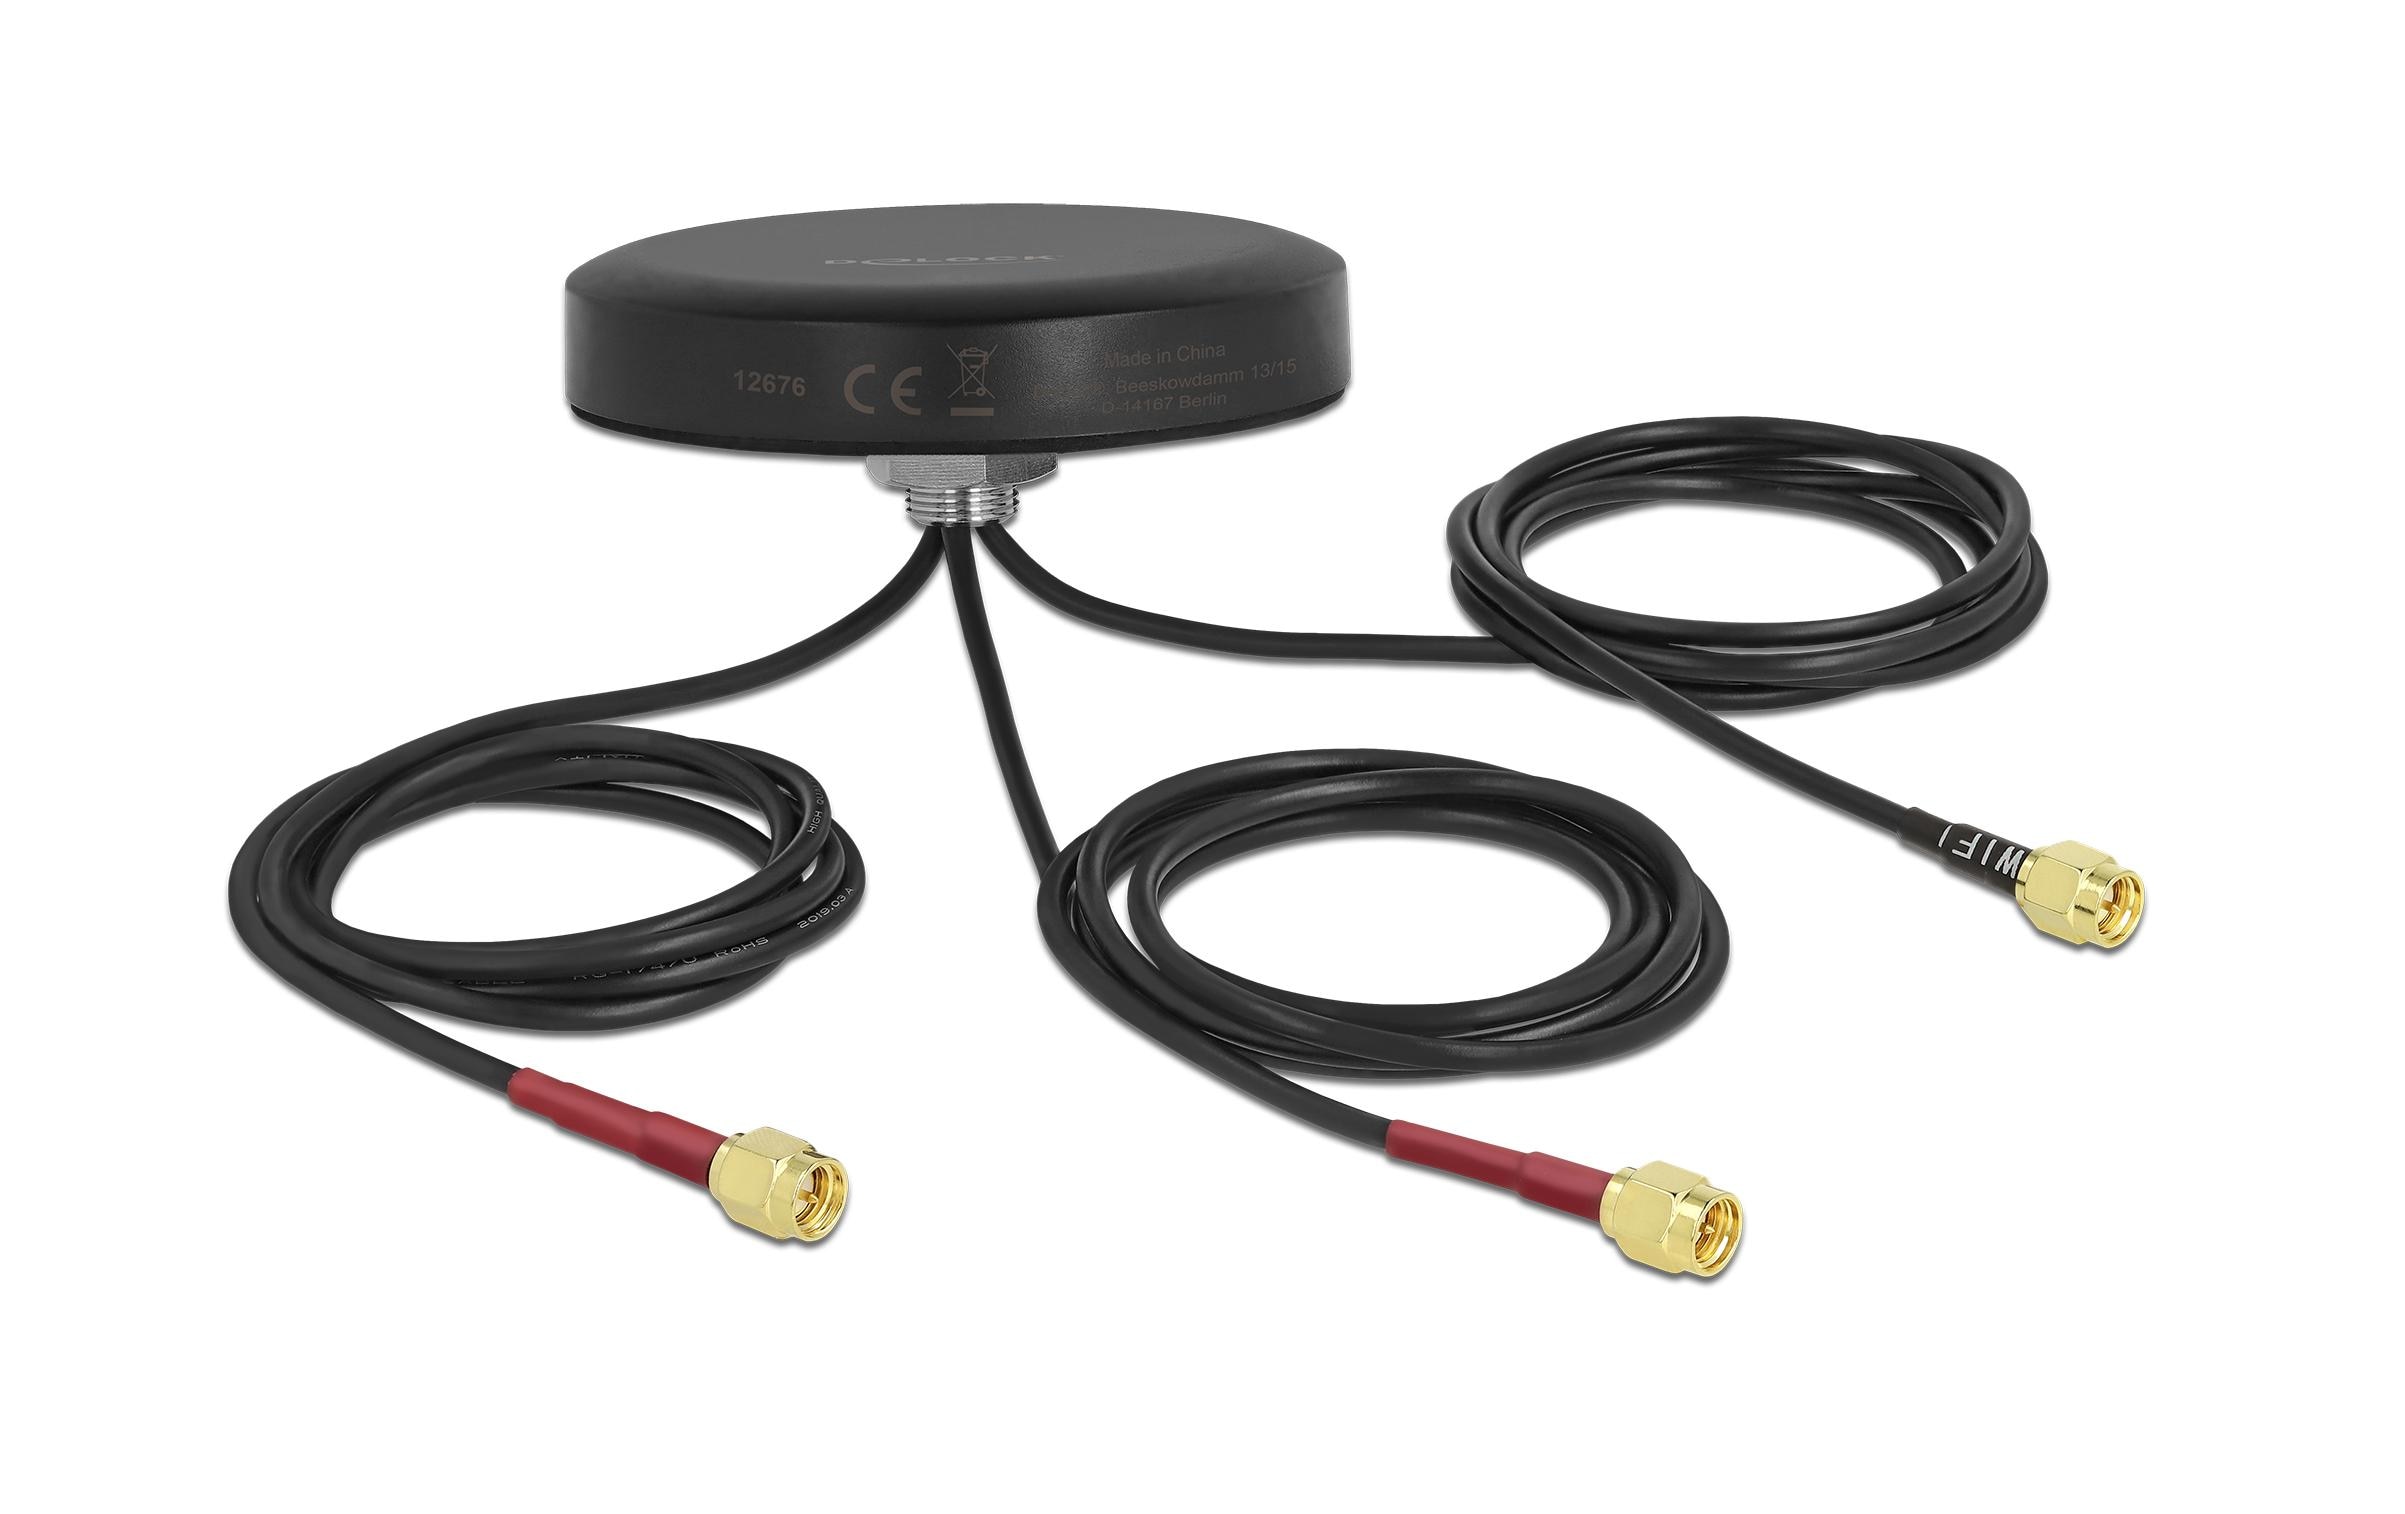 Delock LTE/WLAN/GPS-Antenne LTE MIMO Dualband SMA 2 dBi Rundstrahl